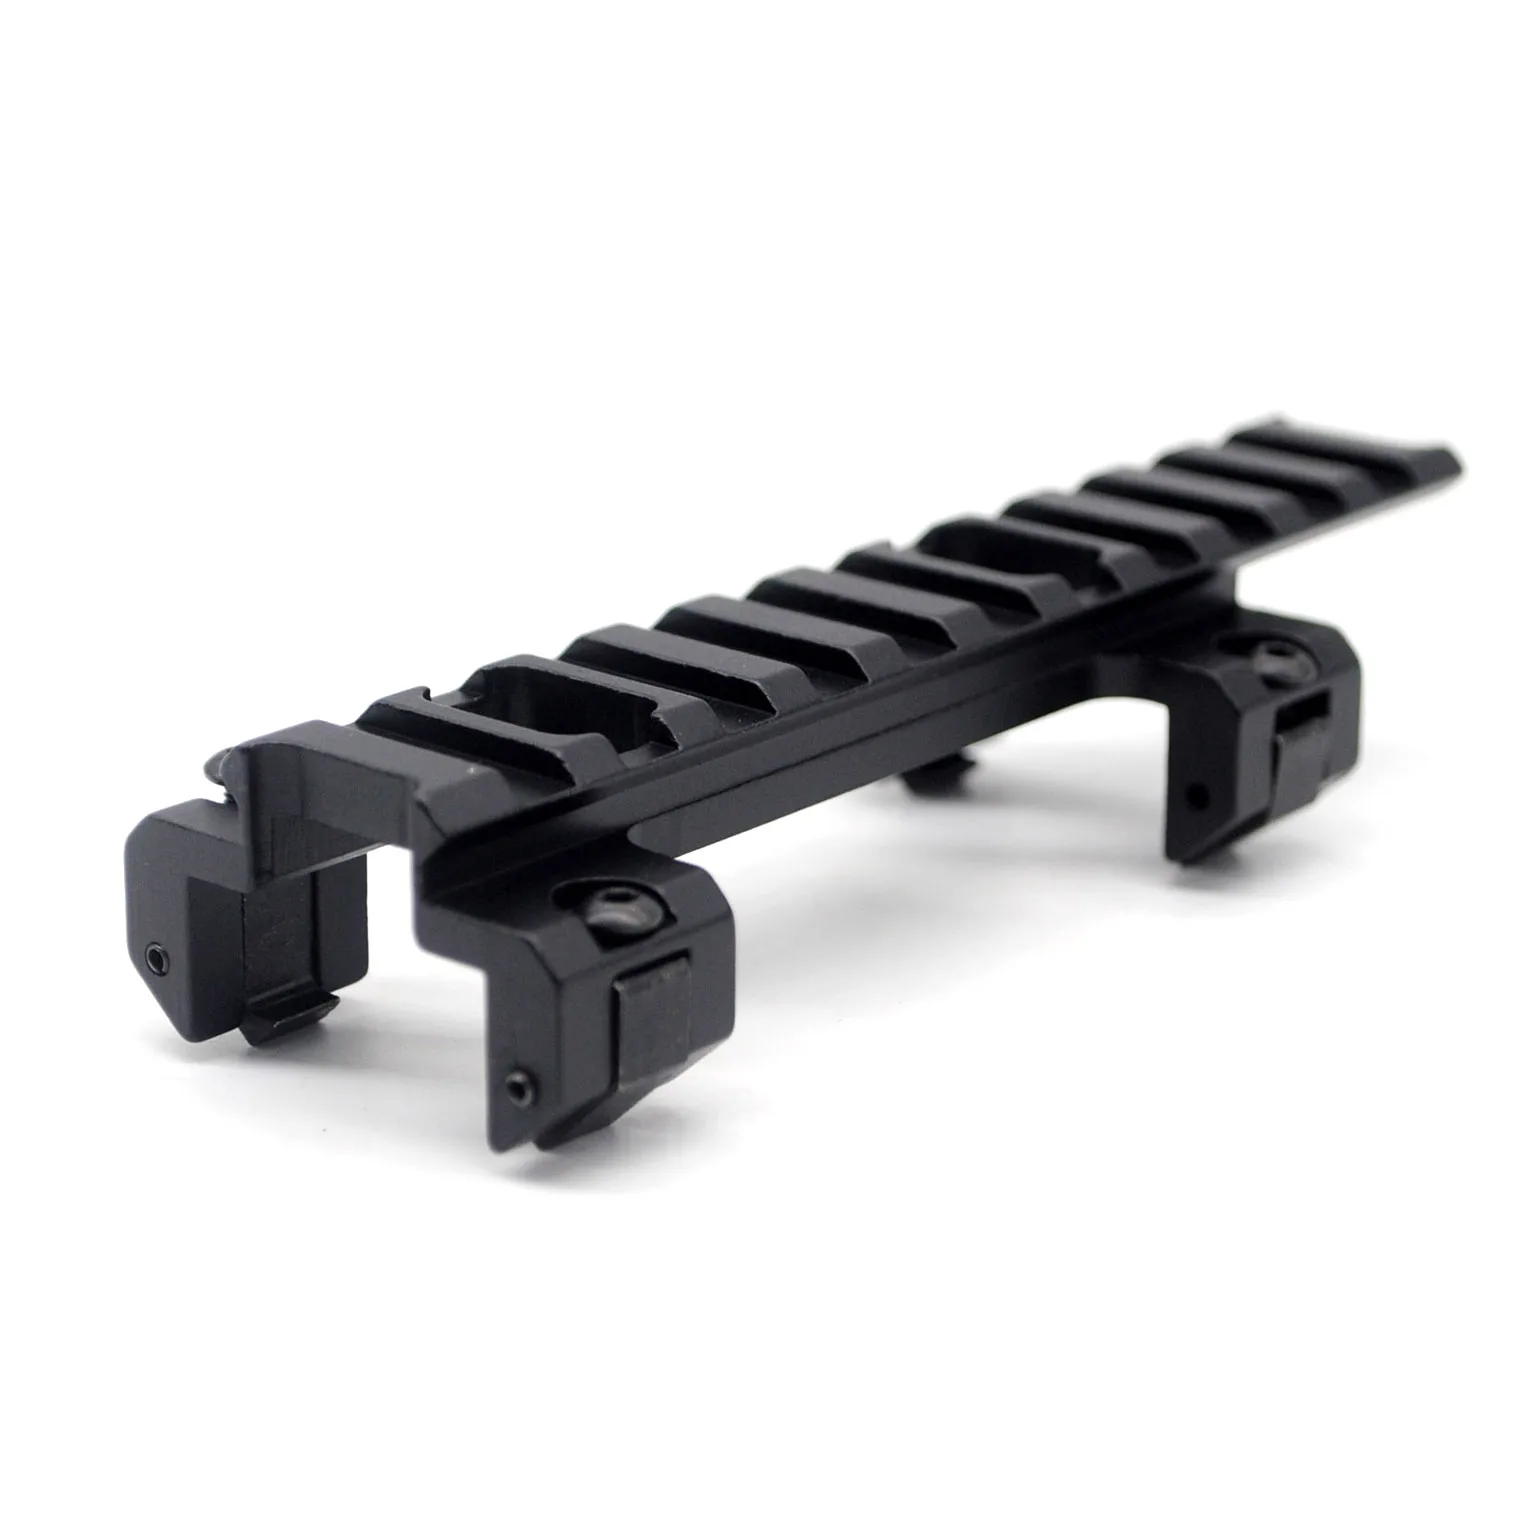 20mm Picatinny Weaver Rail Extension Scope Mount Adapter Claw With 11 ...